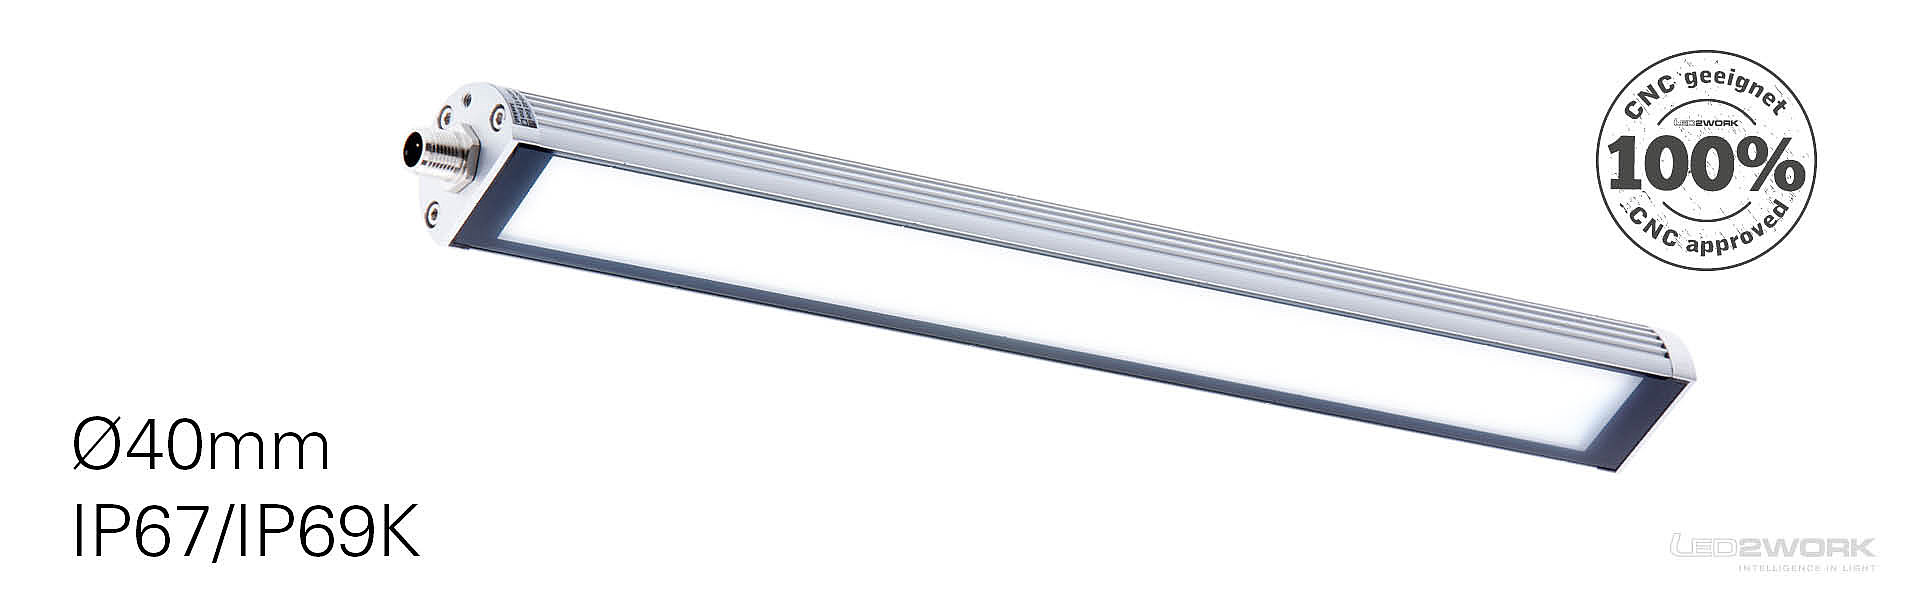 LED2WORk machine light TUBELED_40 II - approx. 1m long, barely 40mm diameter and high protection class IP67/IP69K